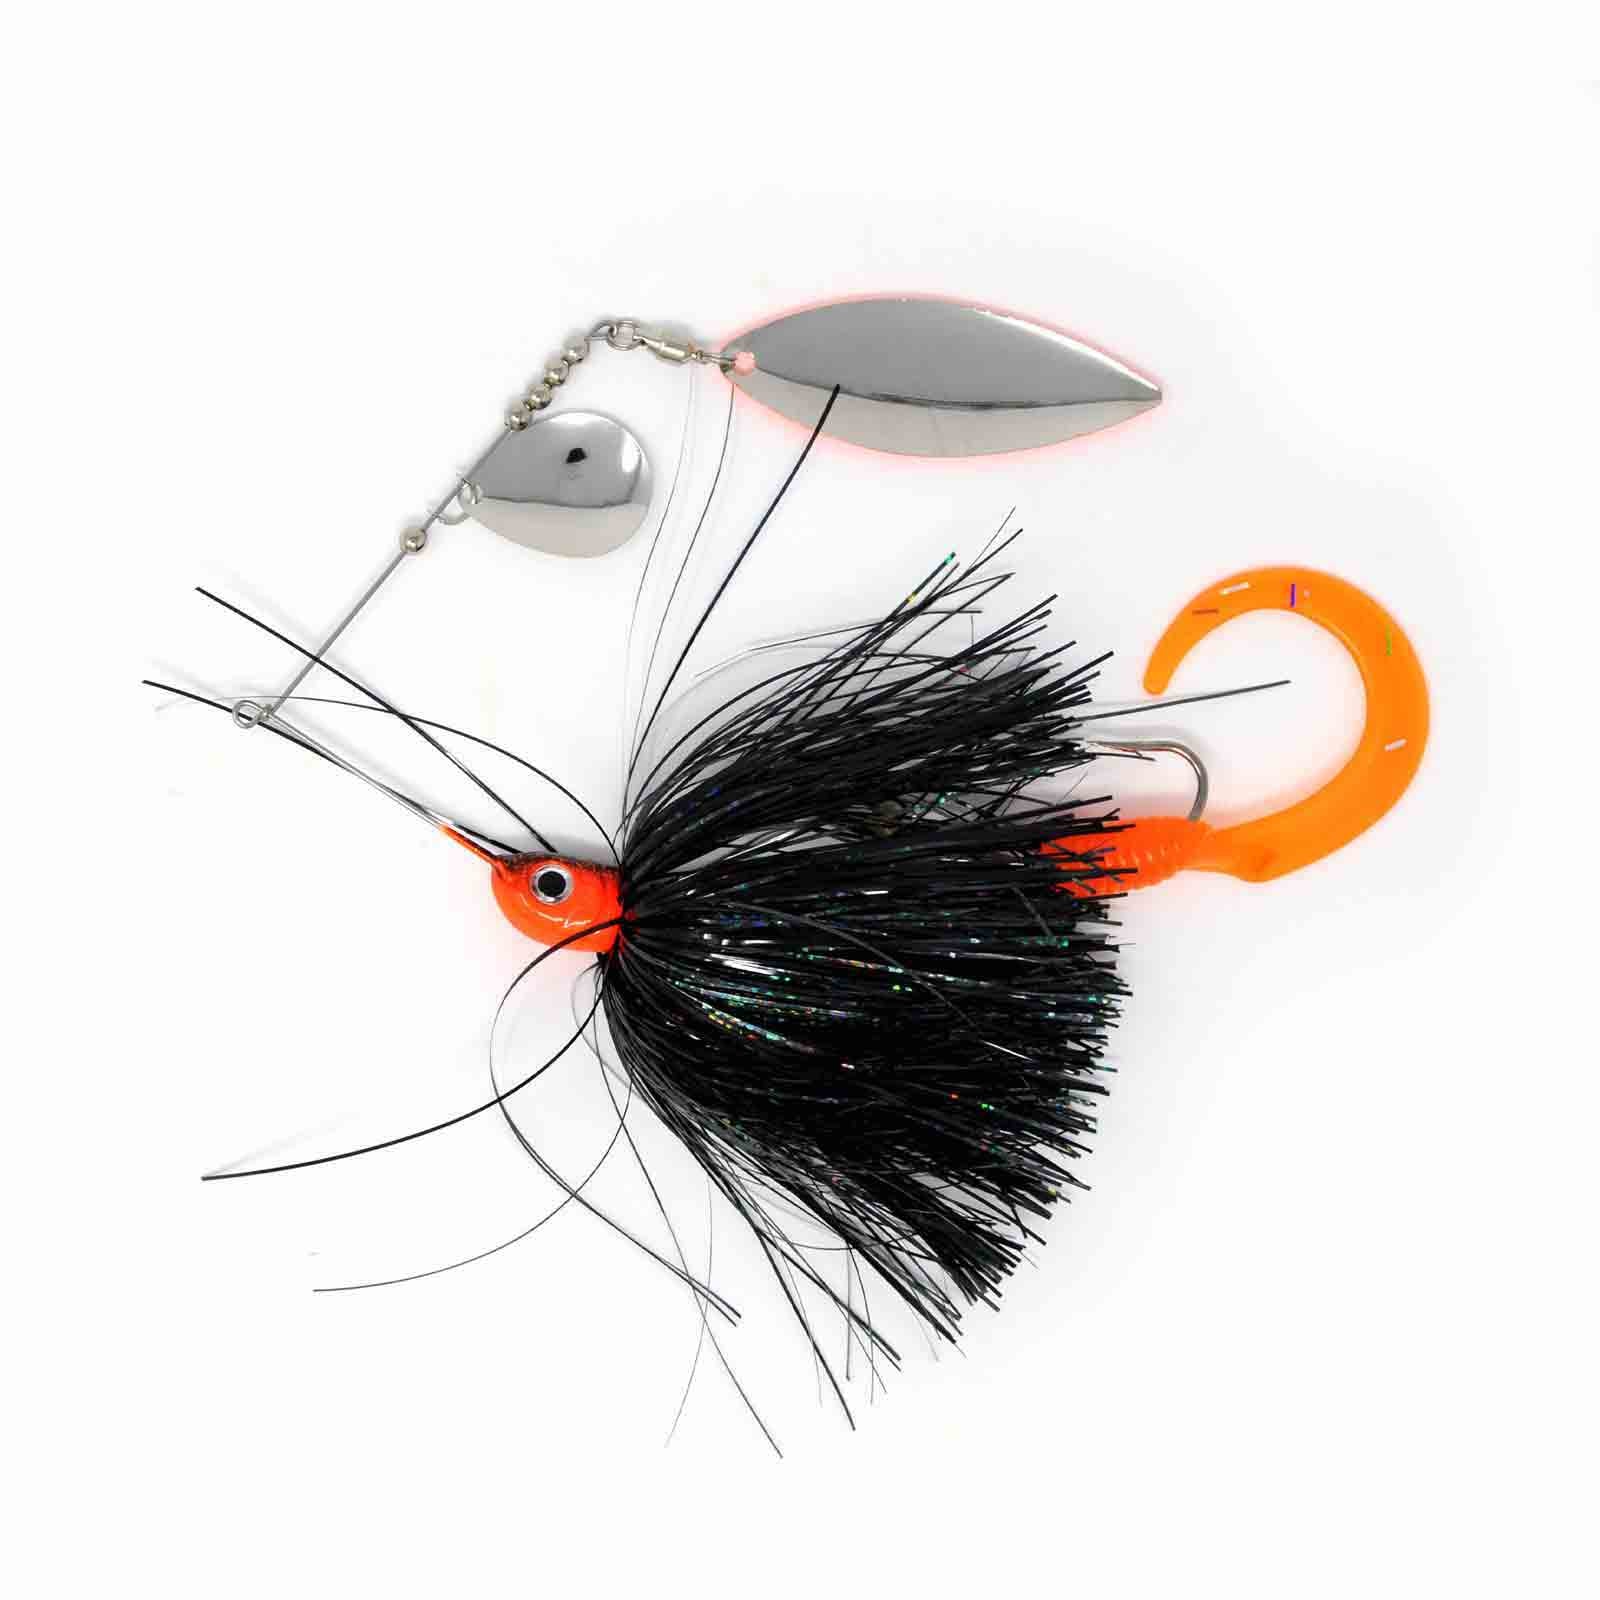 View of Spinnerbaits Esox Assault Spinnerbait Willow 1oz Black / Orange available at EZOKO Pike and Musky Shop